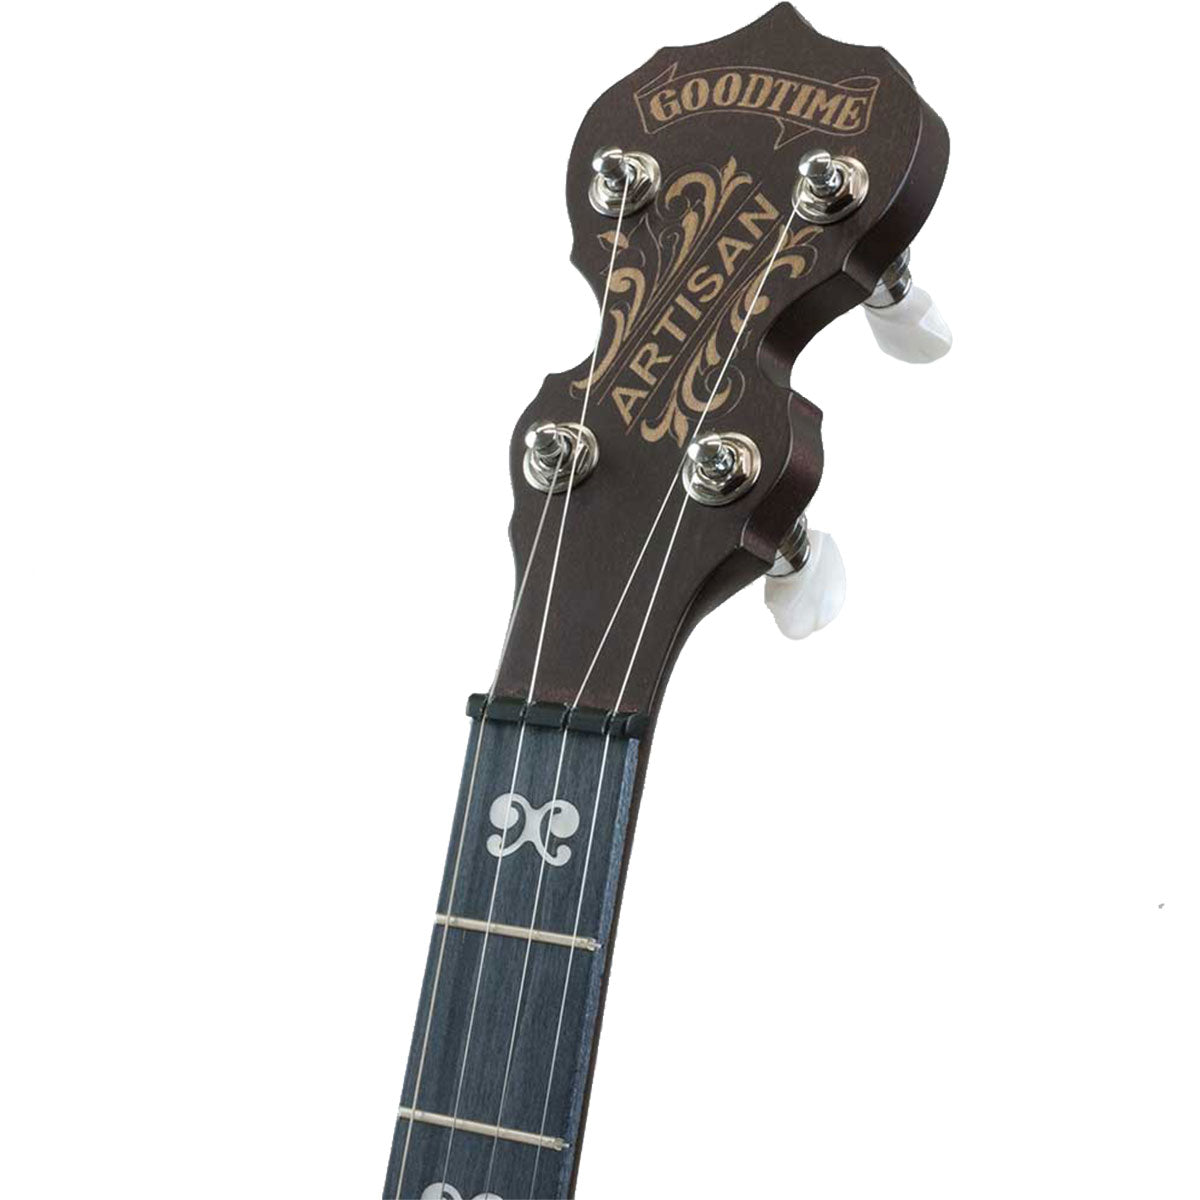 Detail image of Deering Artisan Goodtime Two 5-String Banjo with Resonator showing top of headstock and portion of fretboard